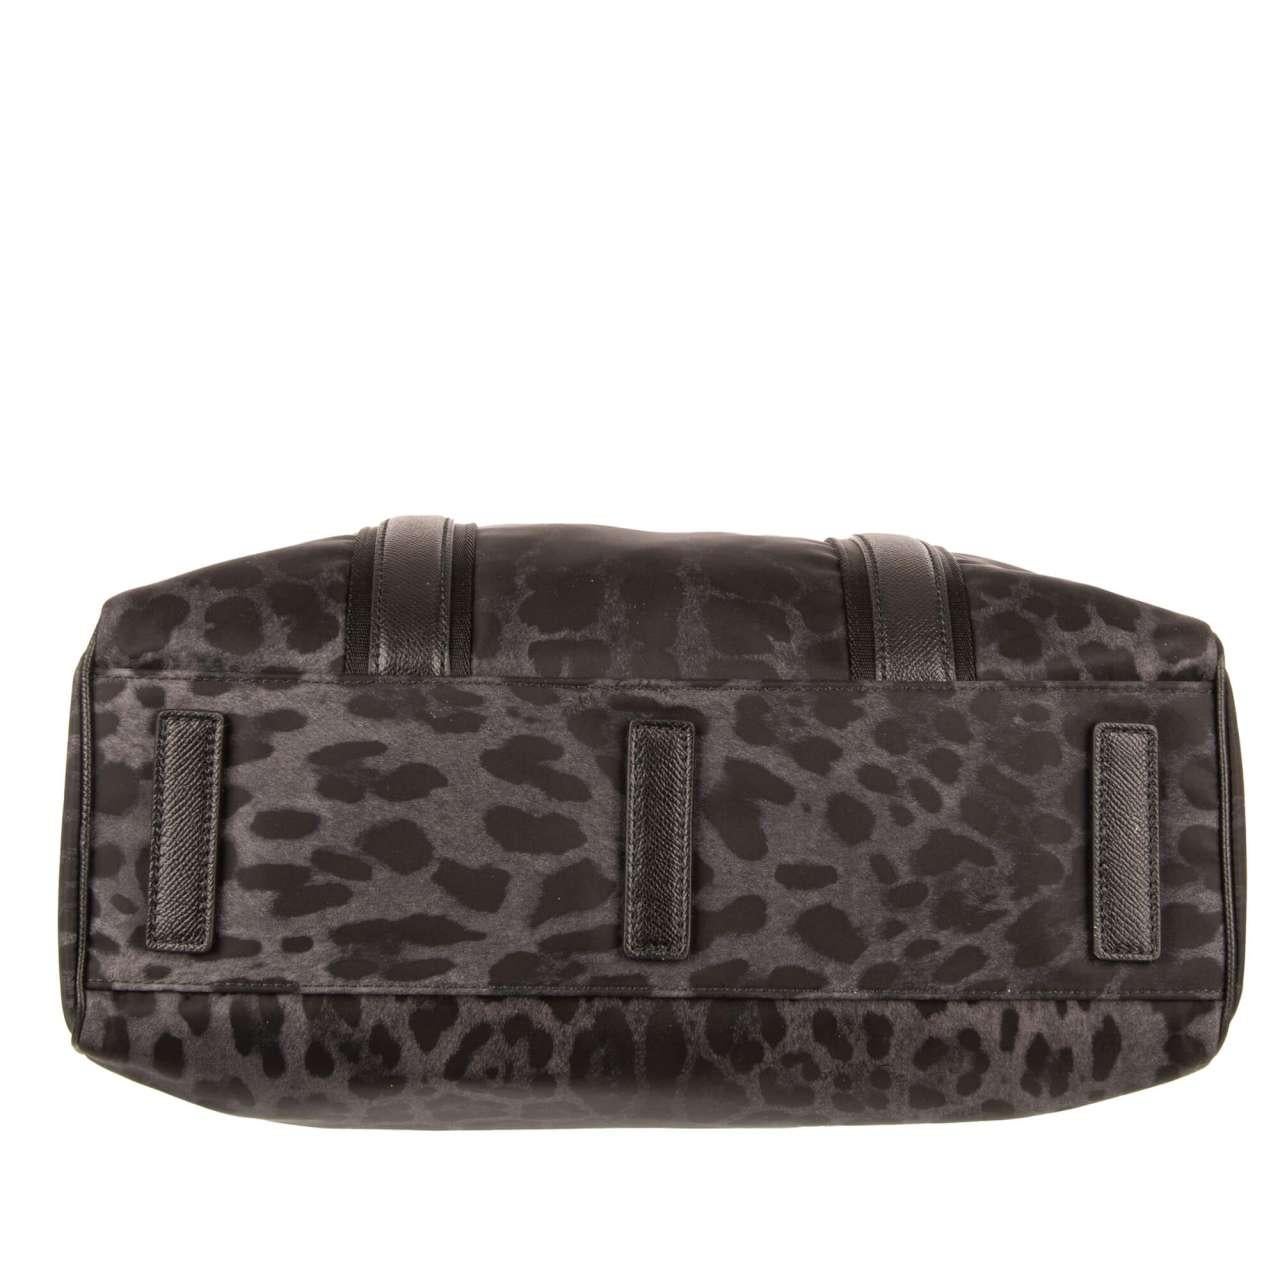 D&G Leopard Printed Nylon Briefcase Bag with Logo and Pockets Black Gray For Sale 1